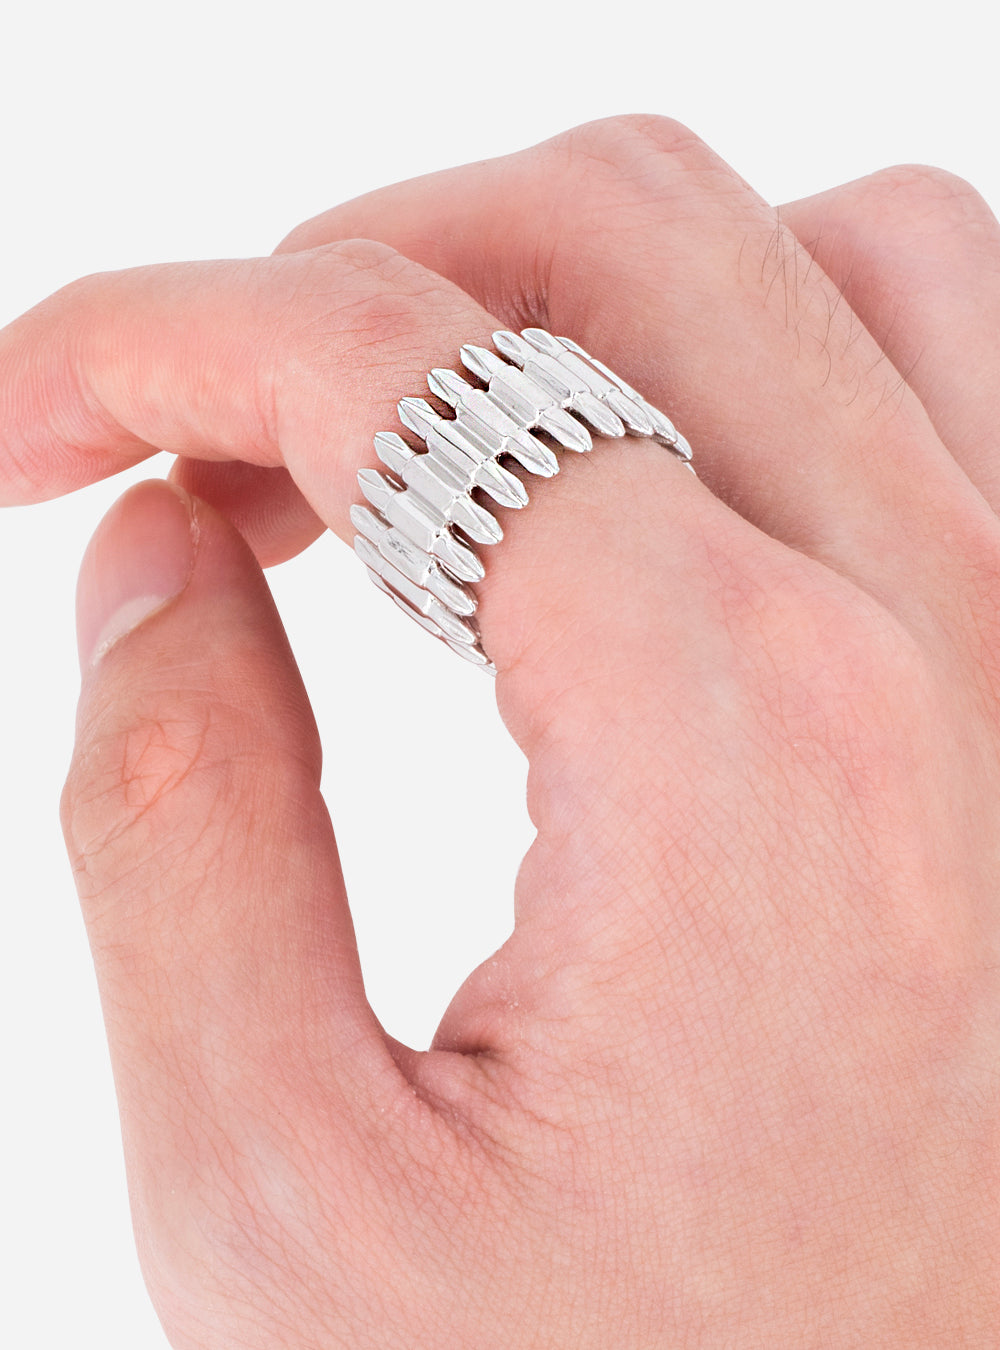 A person's hand is holding a MIDNIGHTFACTORY Driverbits eternity ring.